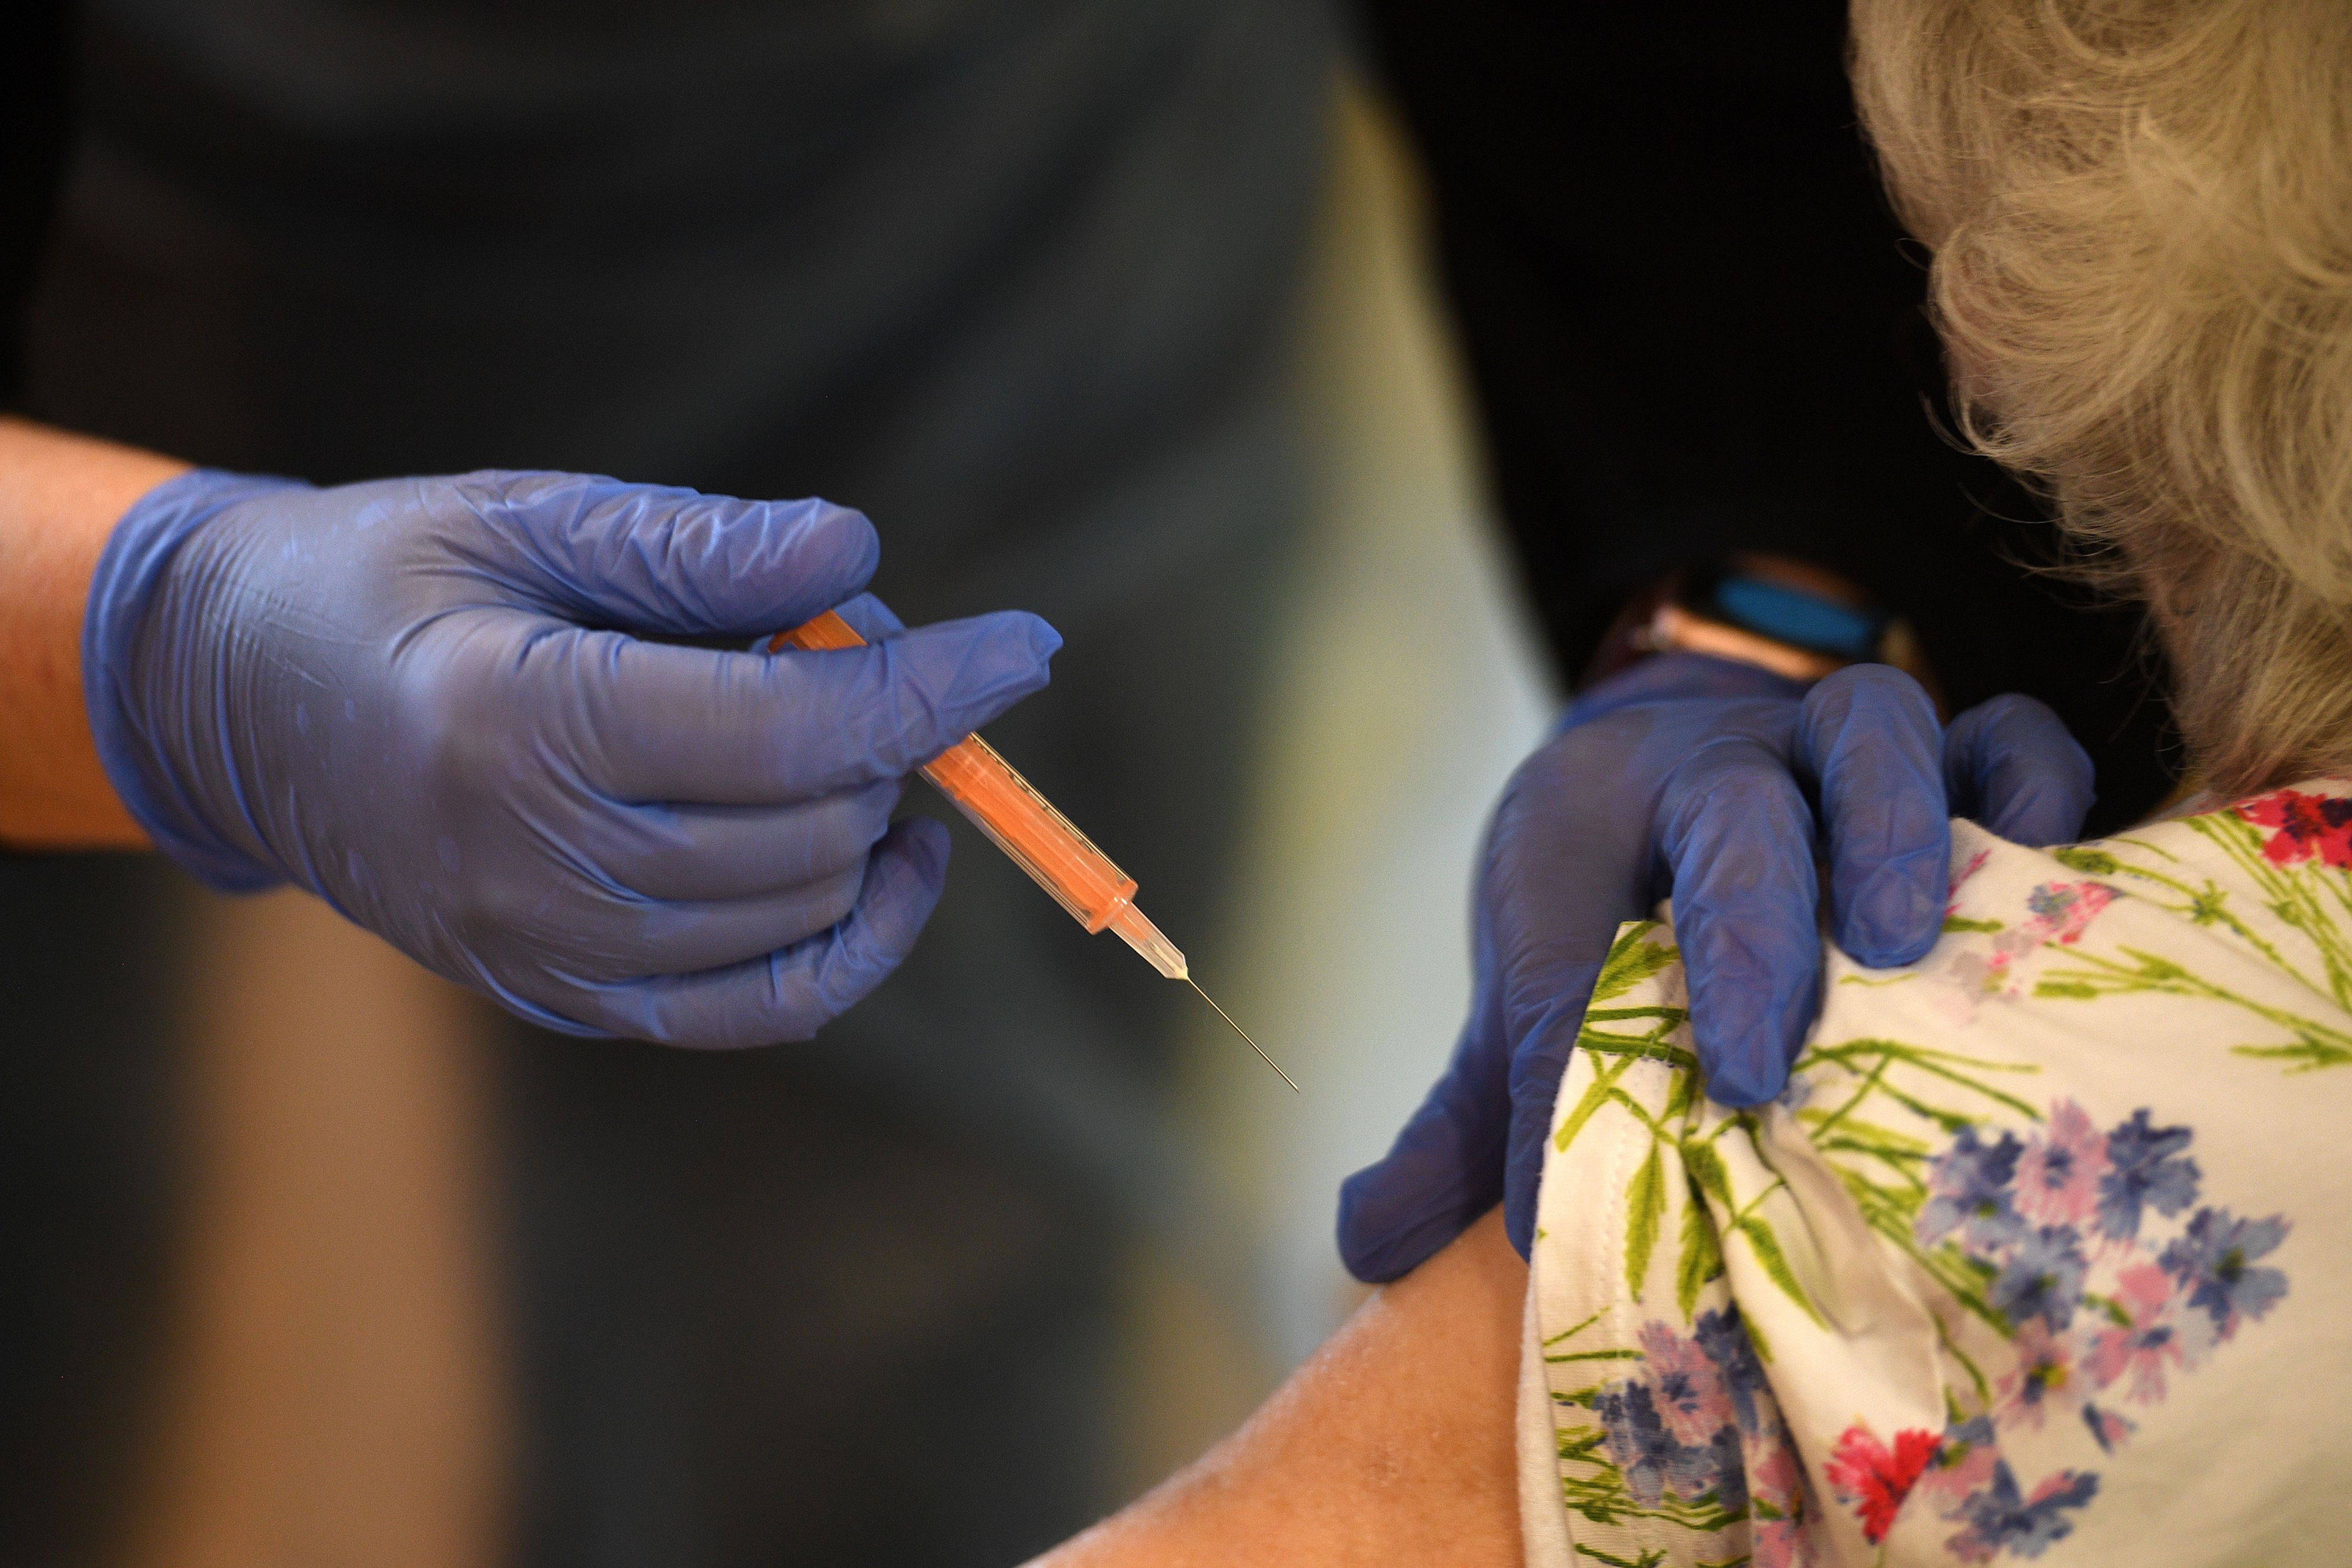 A resident at a care home receives a dose of the Oxford/AstraZeneca Covid-19 vaccine in Wigan, England, on January 21.